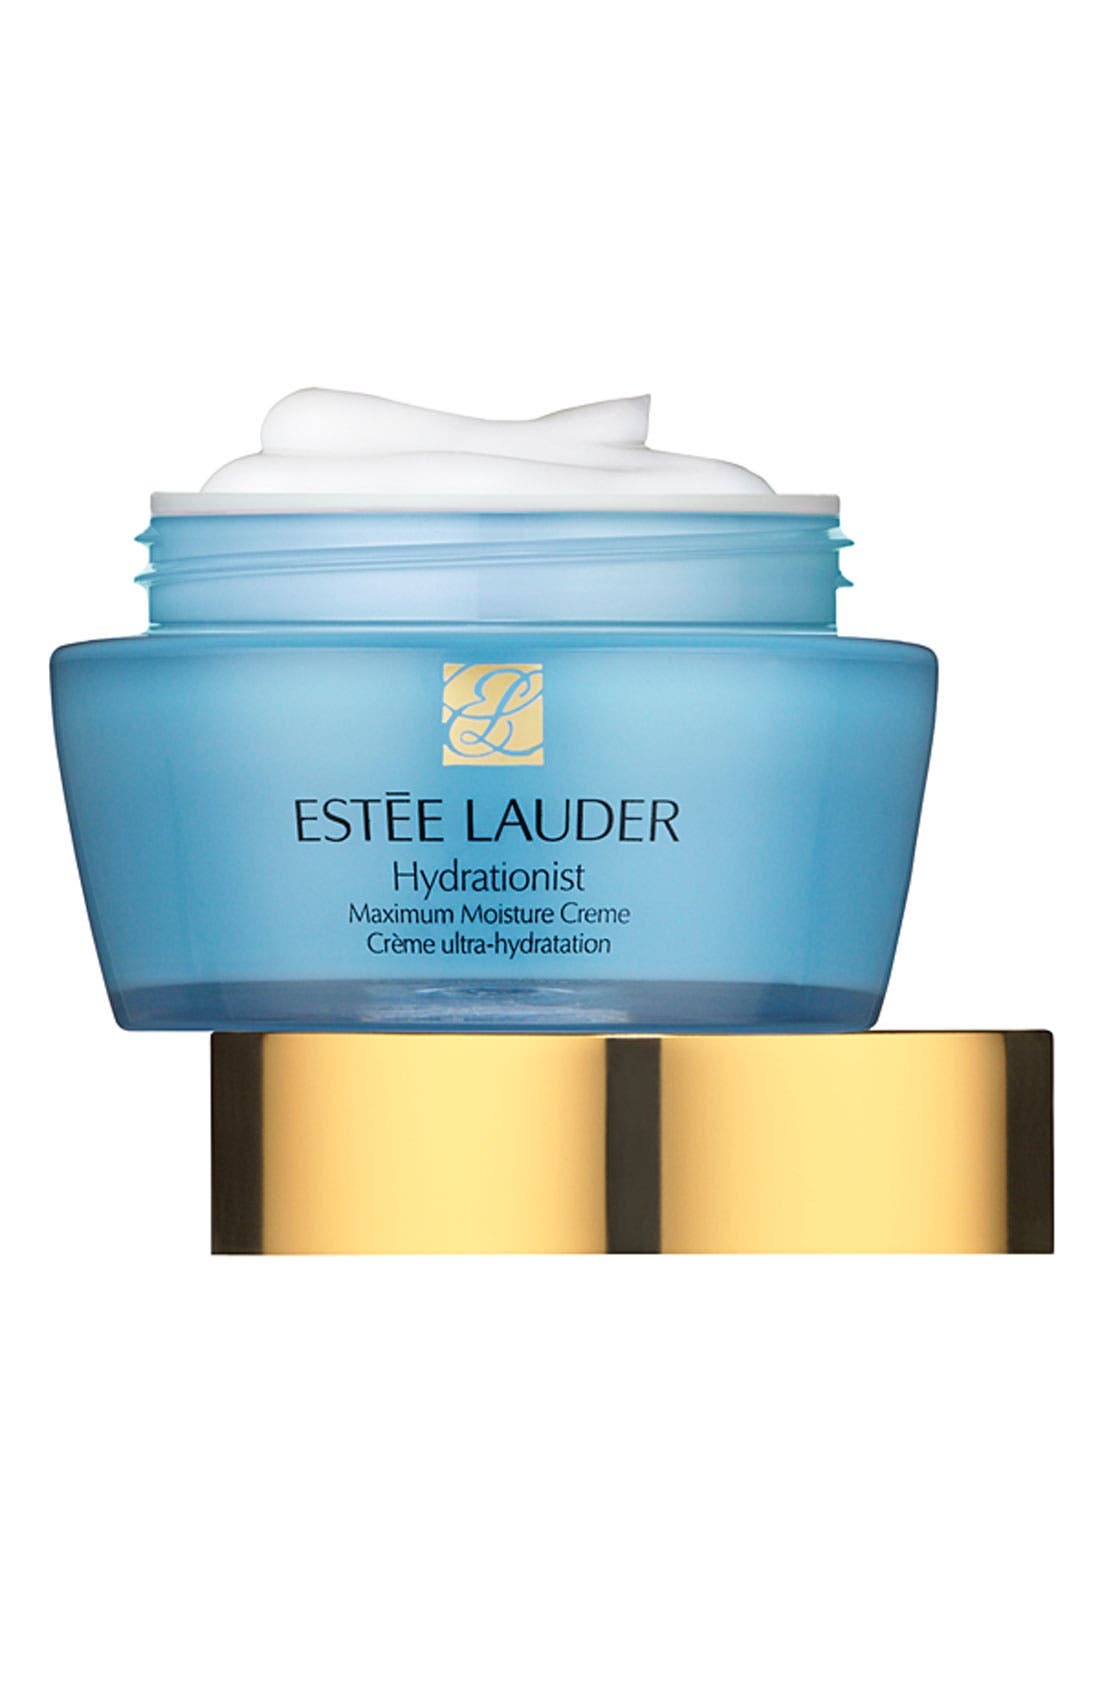 Celebrity Beauty News: Eva Mendes Is the New Face of Estee Lauder Skin Care